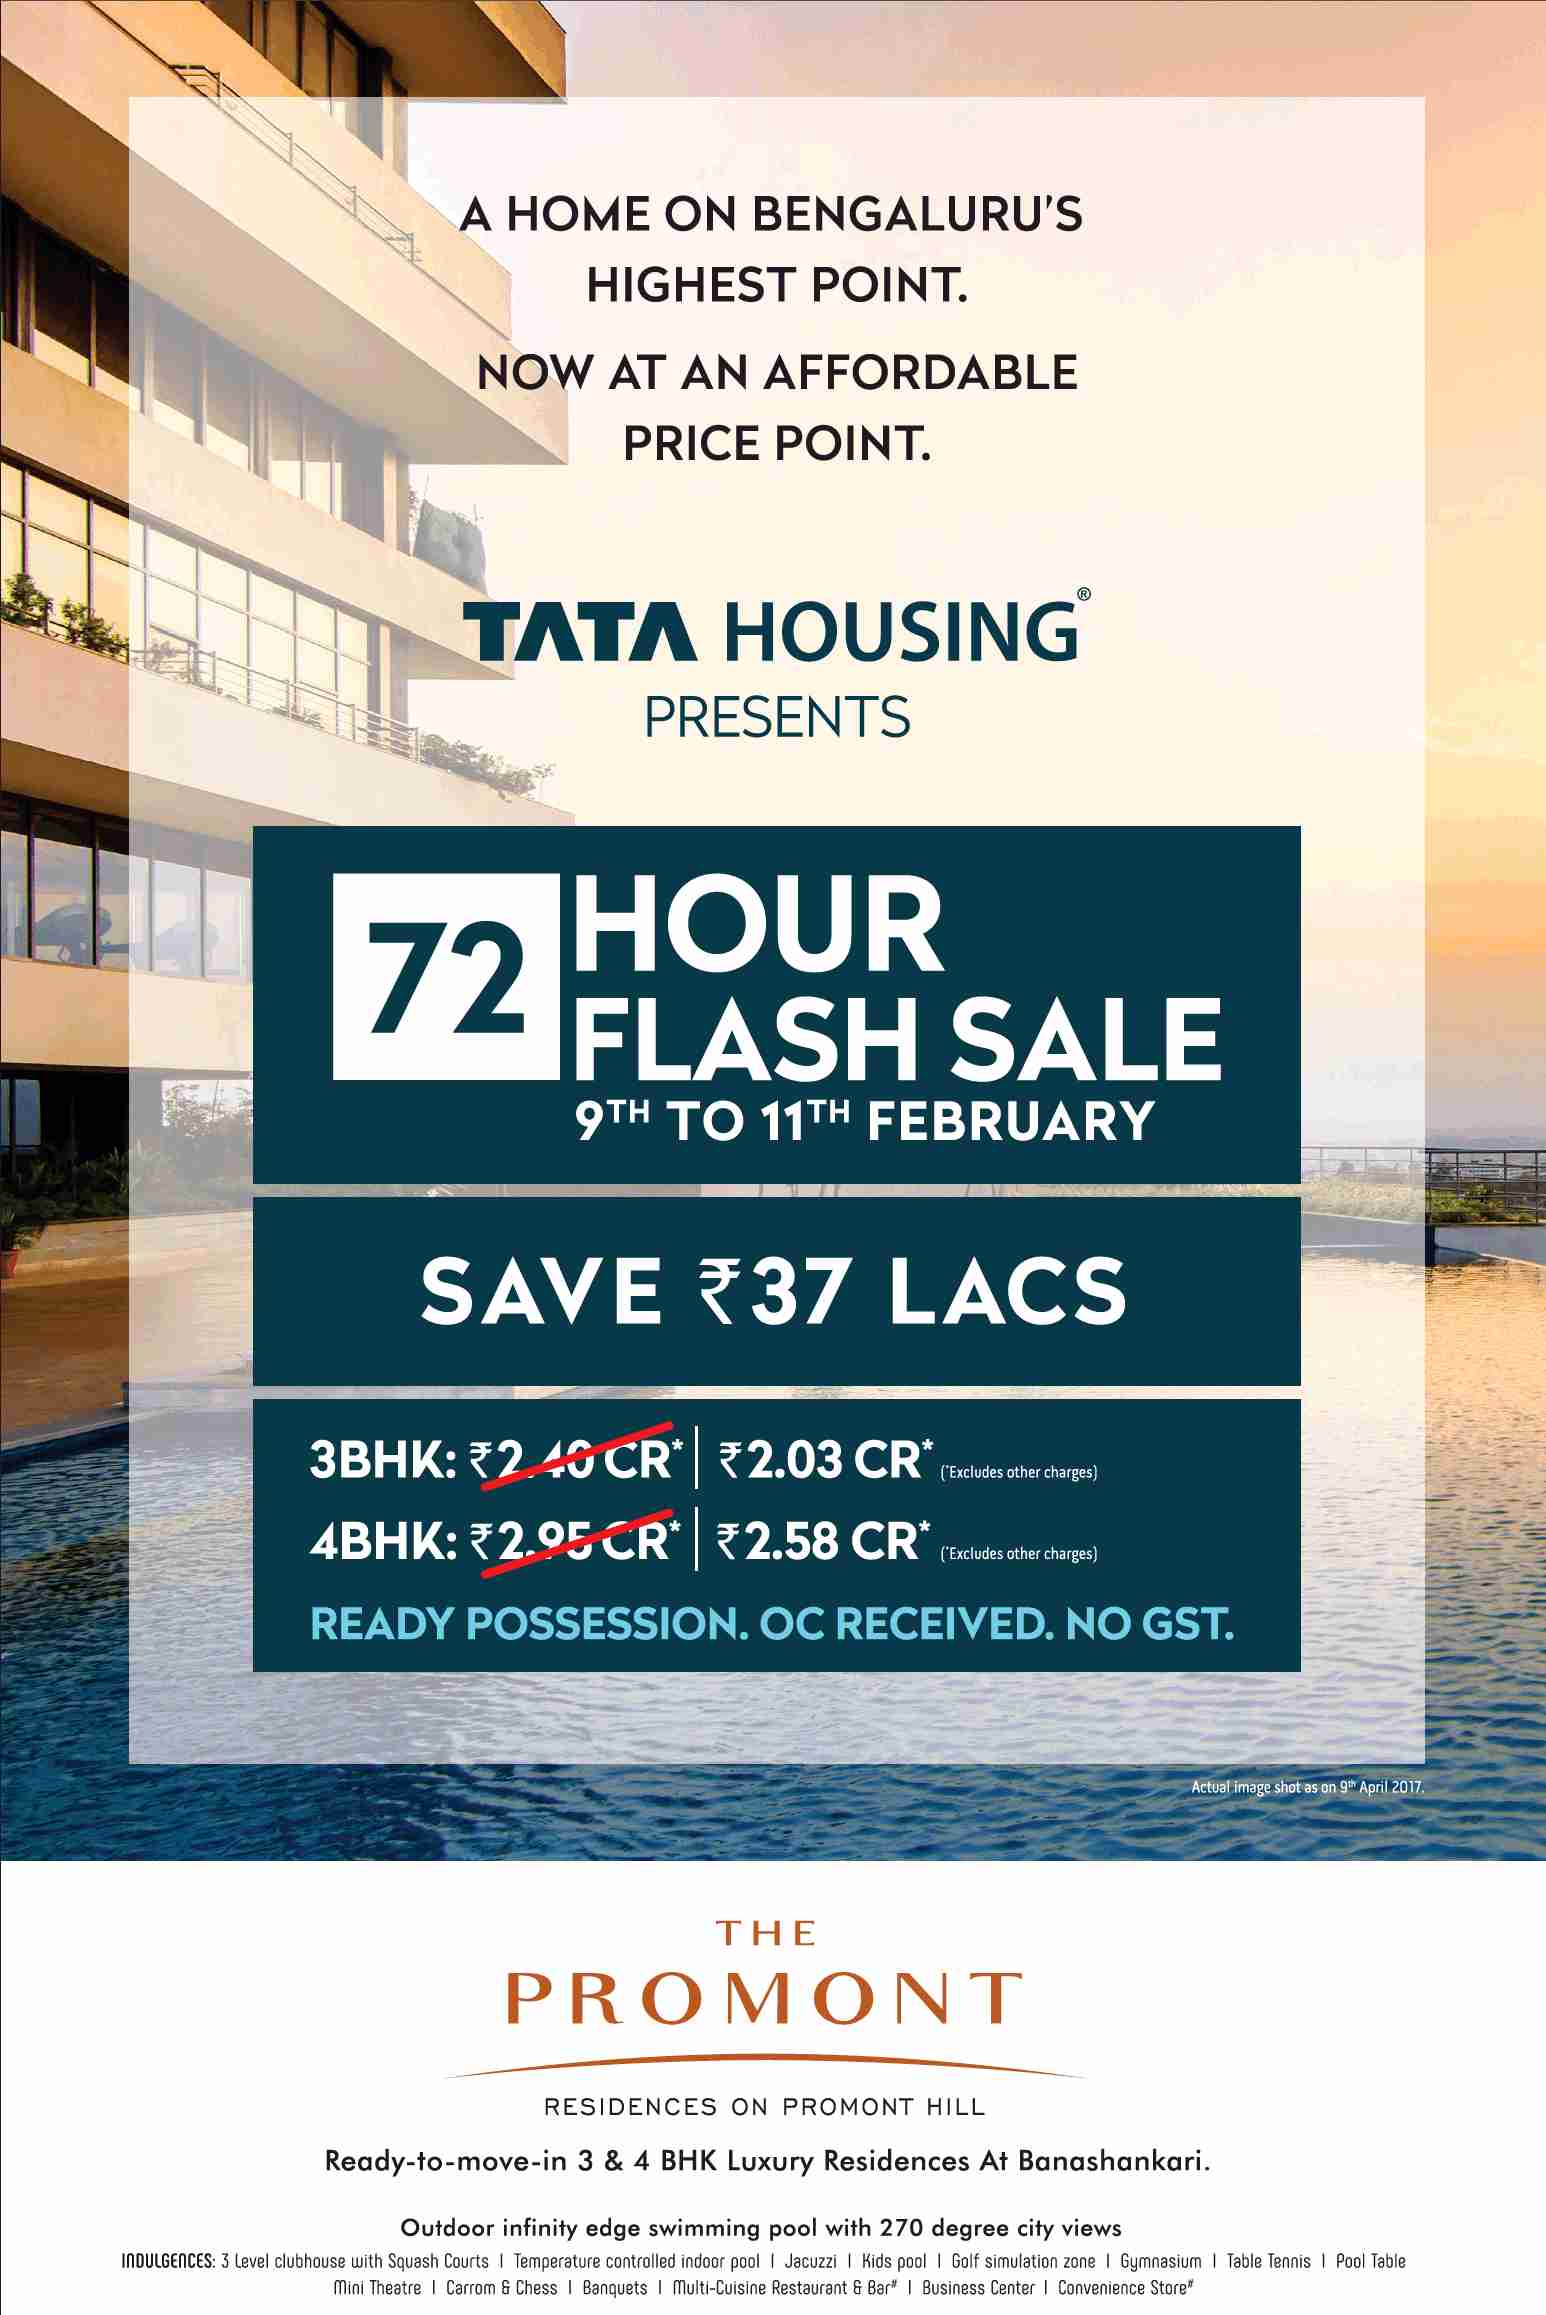 Reside in ready possession homes with no GST at Tata The Promont in Bangalore